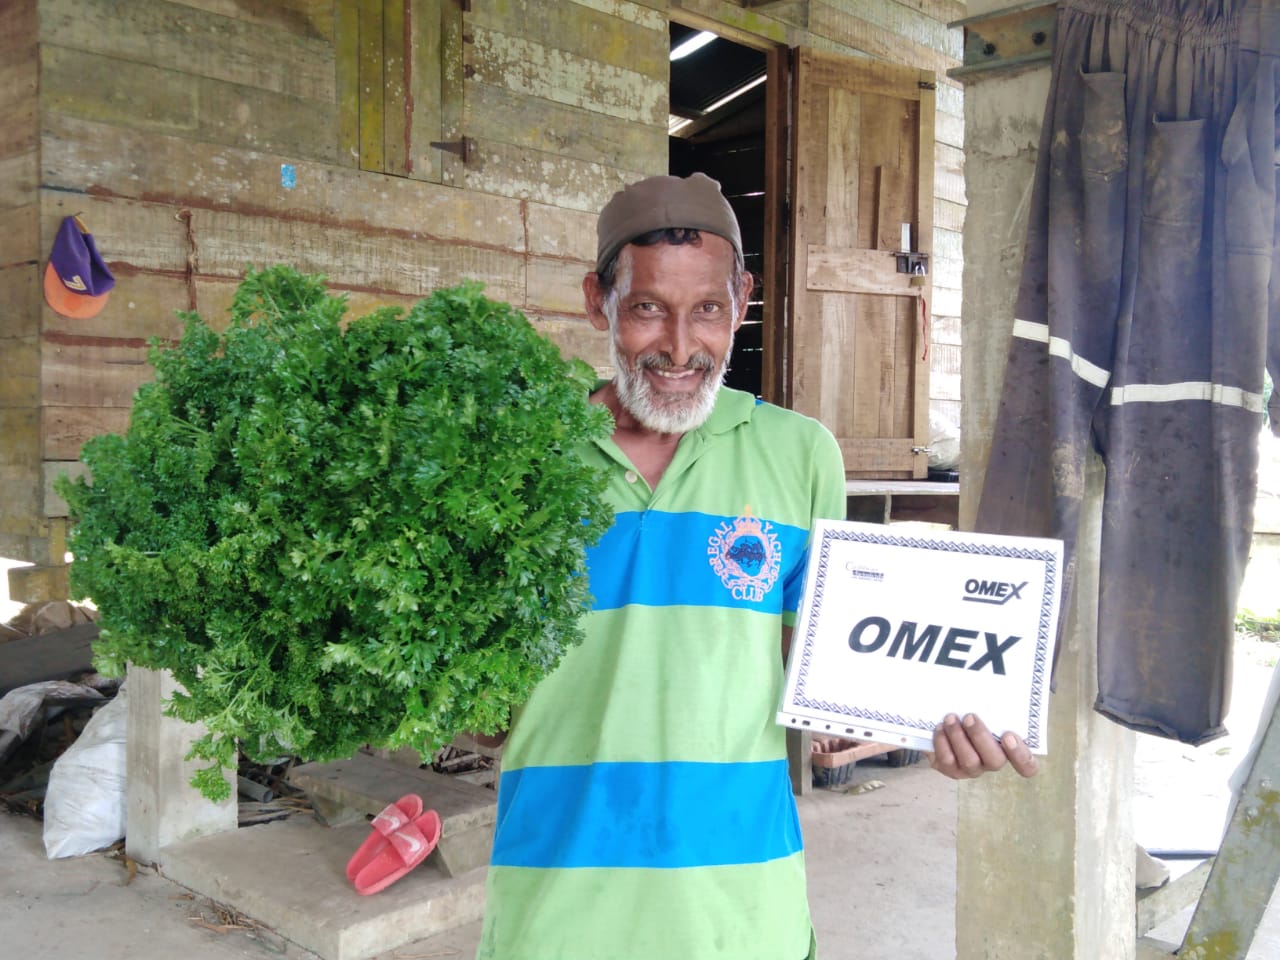 OMEX delivers big smiles